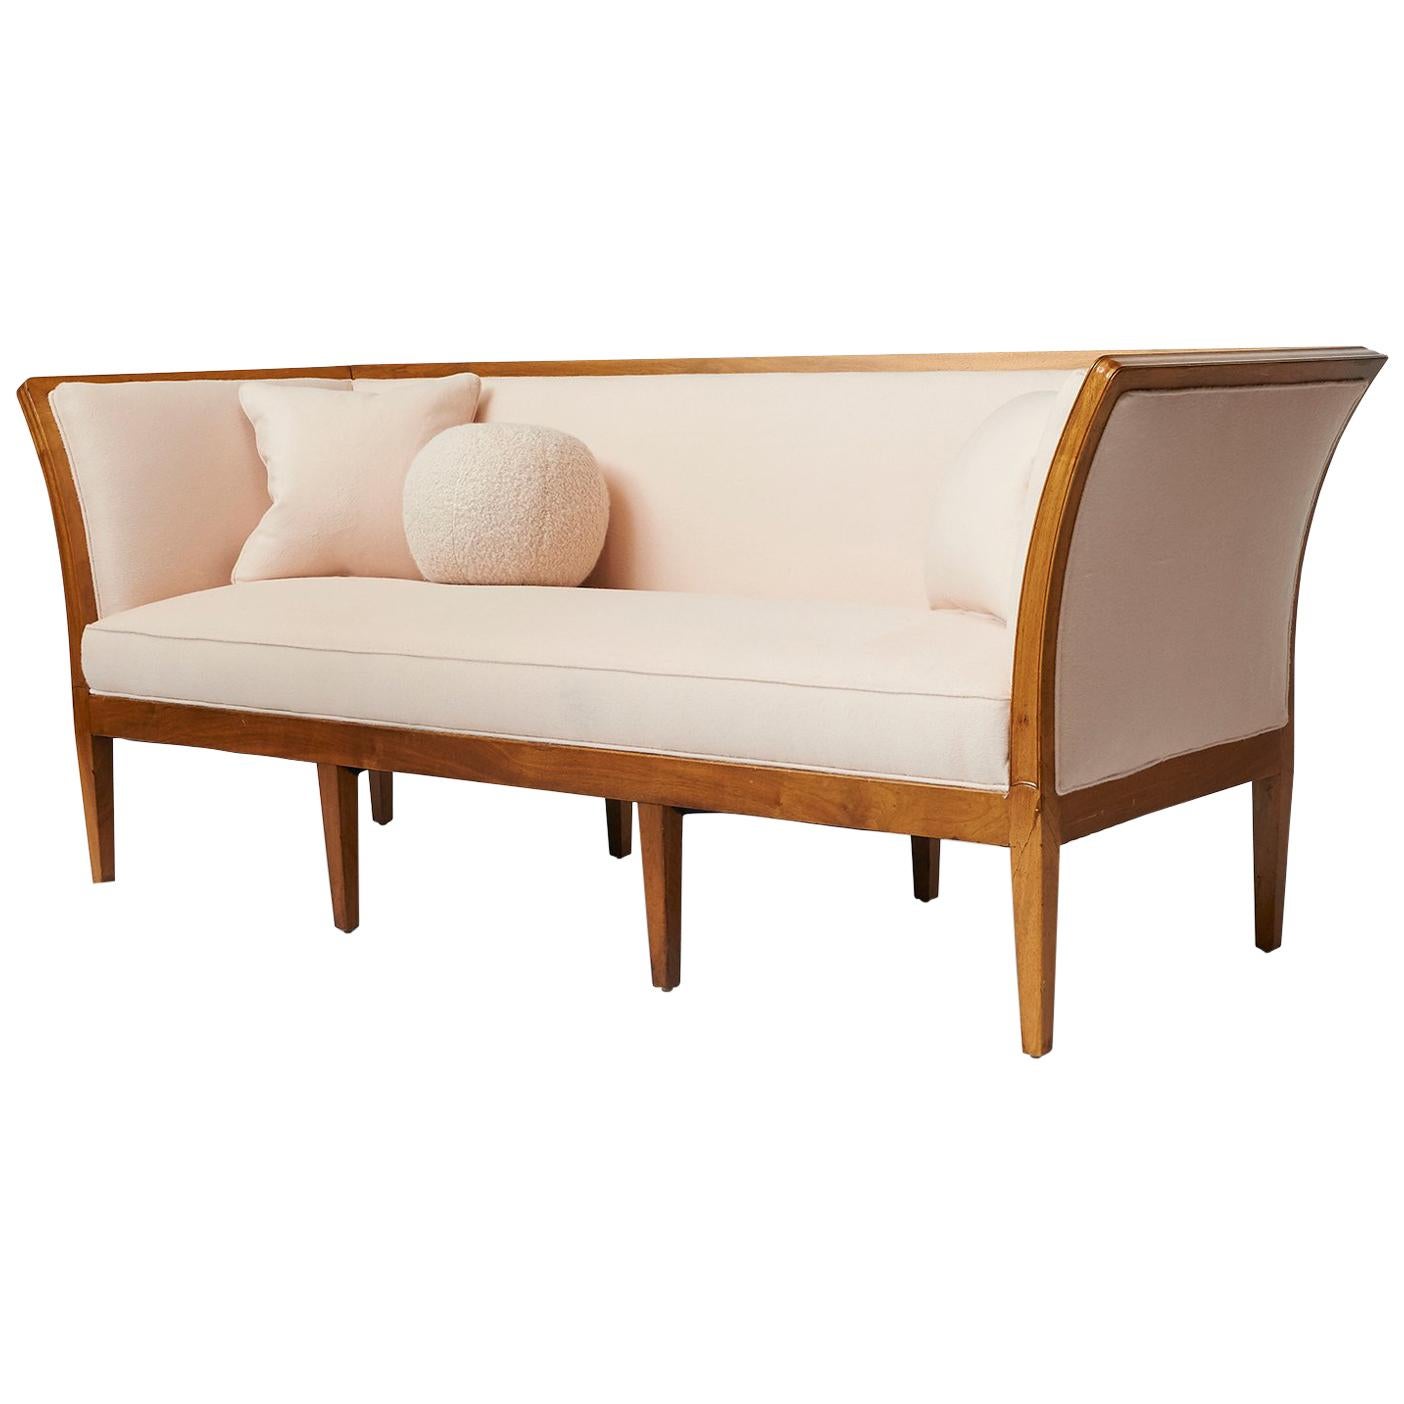 Rare Jacob Kjaer Sofa with 8 Tapered Legs For Sale